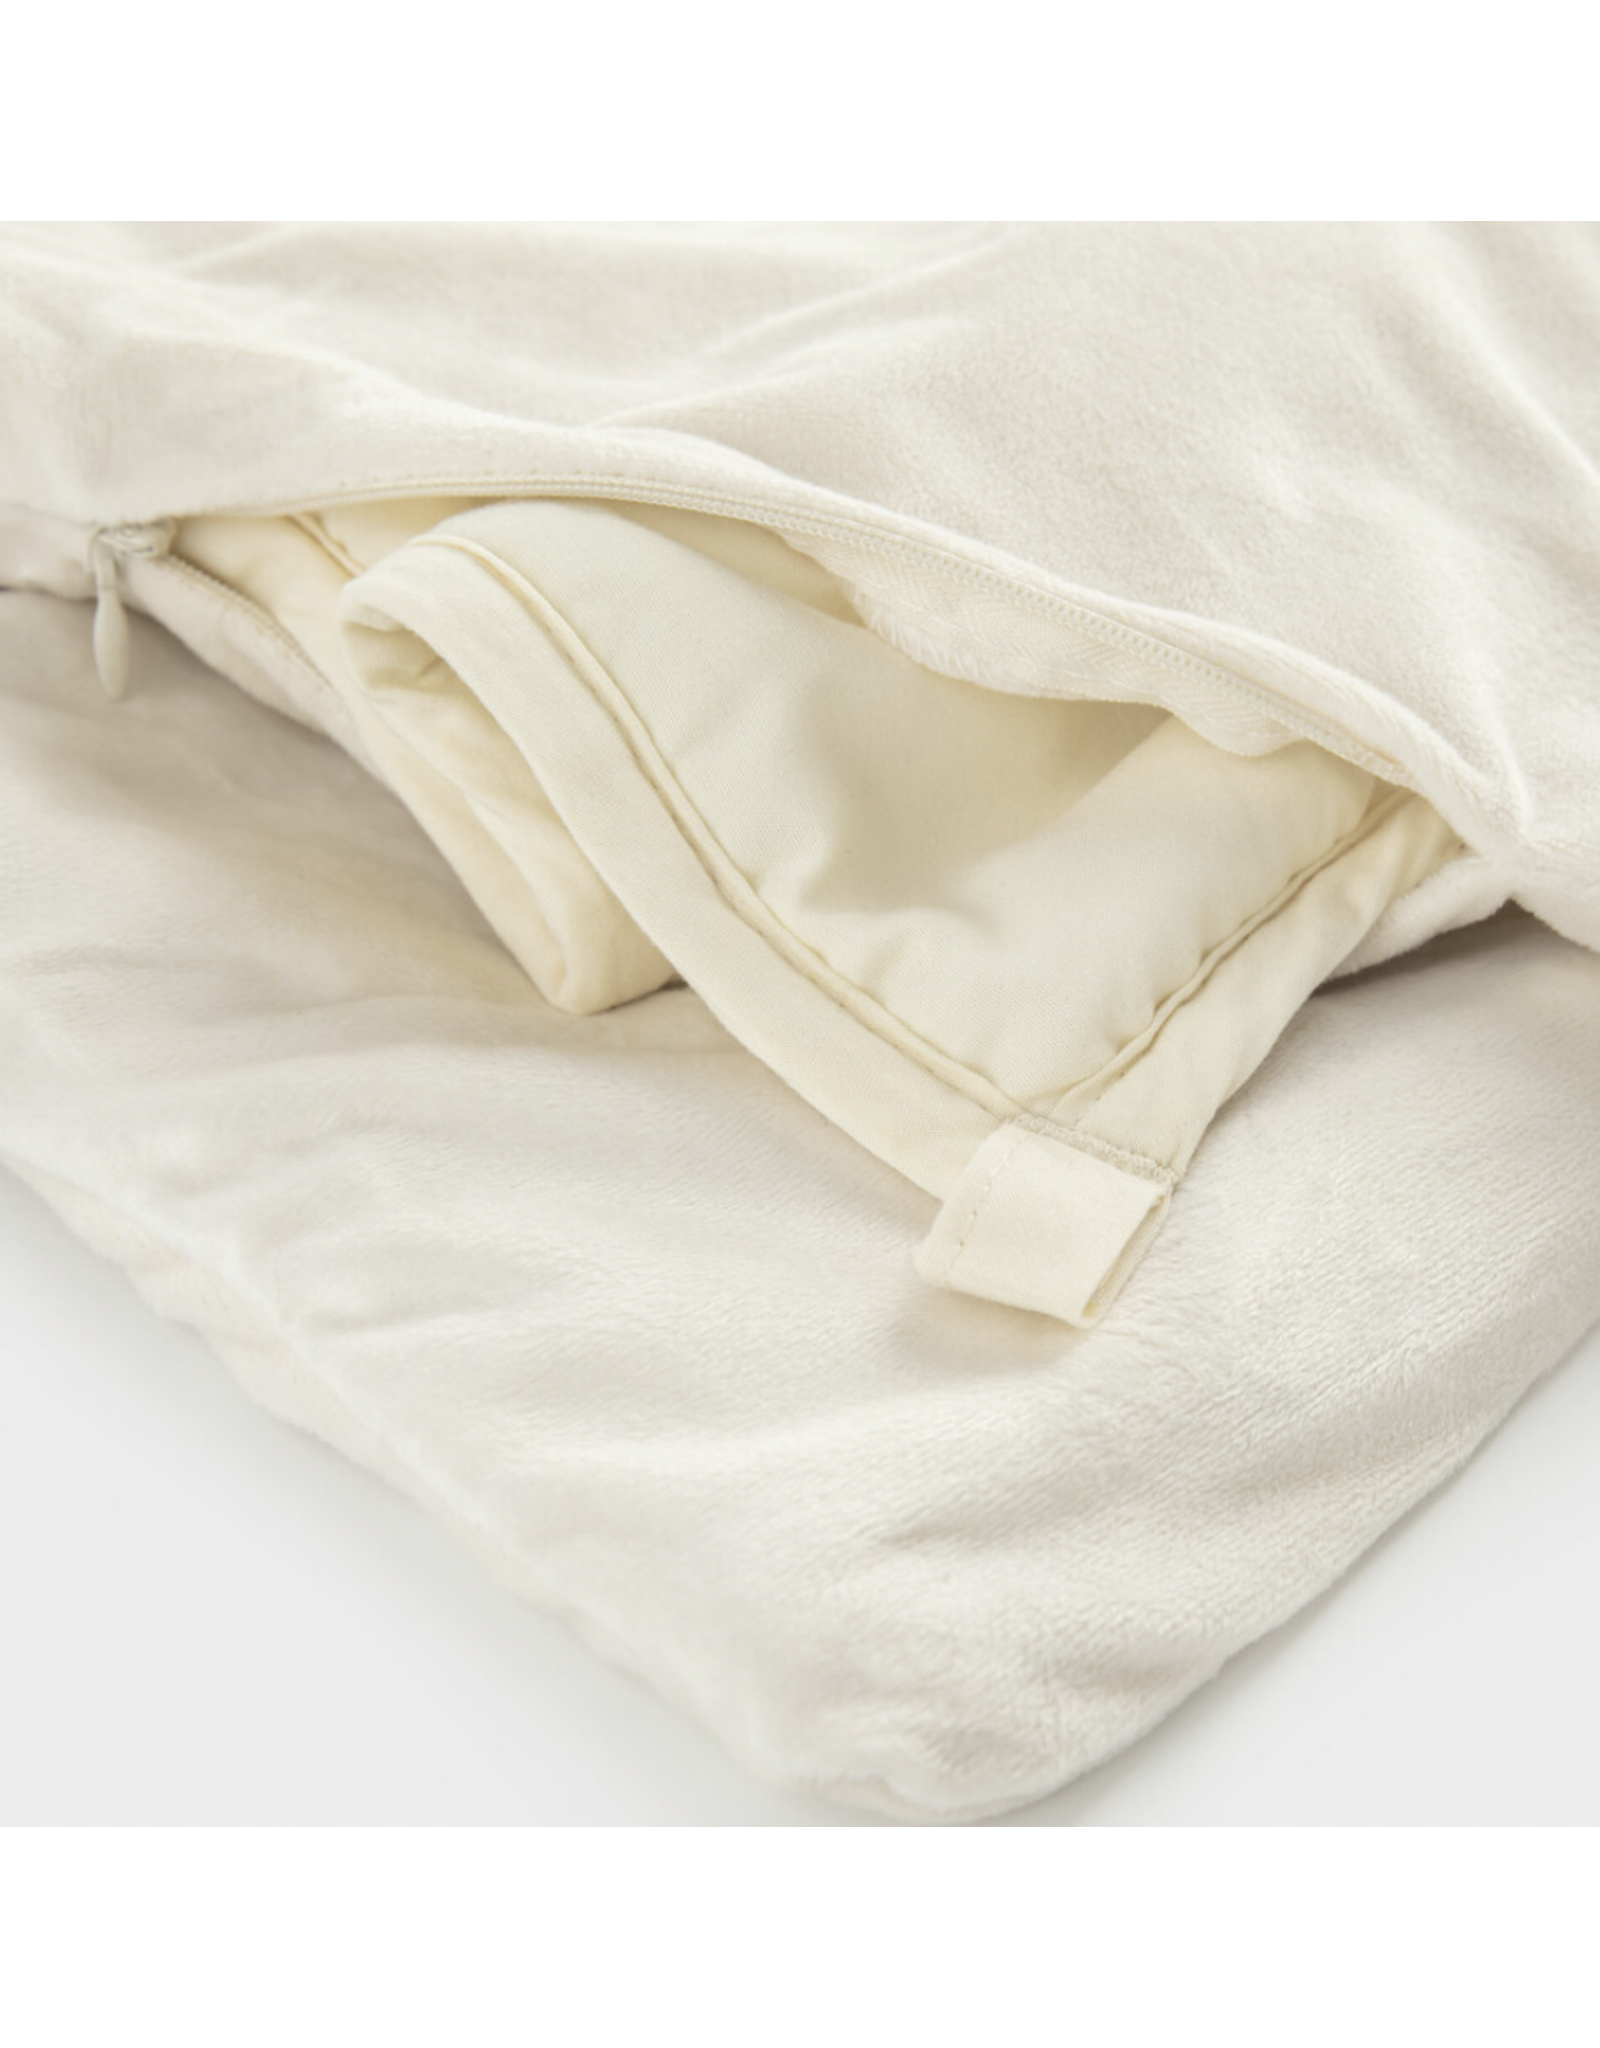 Giving Apparel Weighted Throw Blanket - Giving Collection, Cream